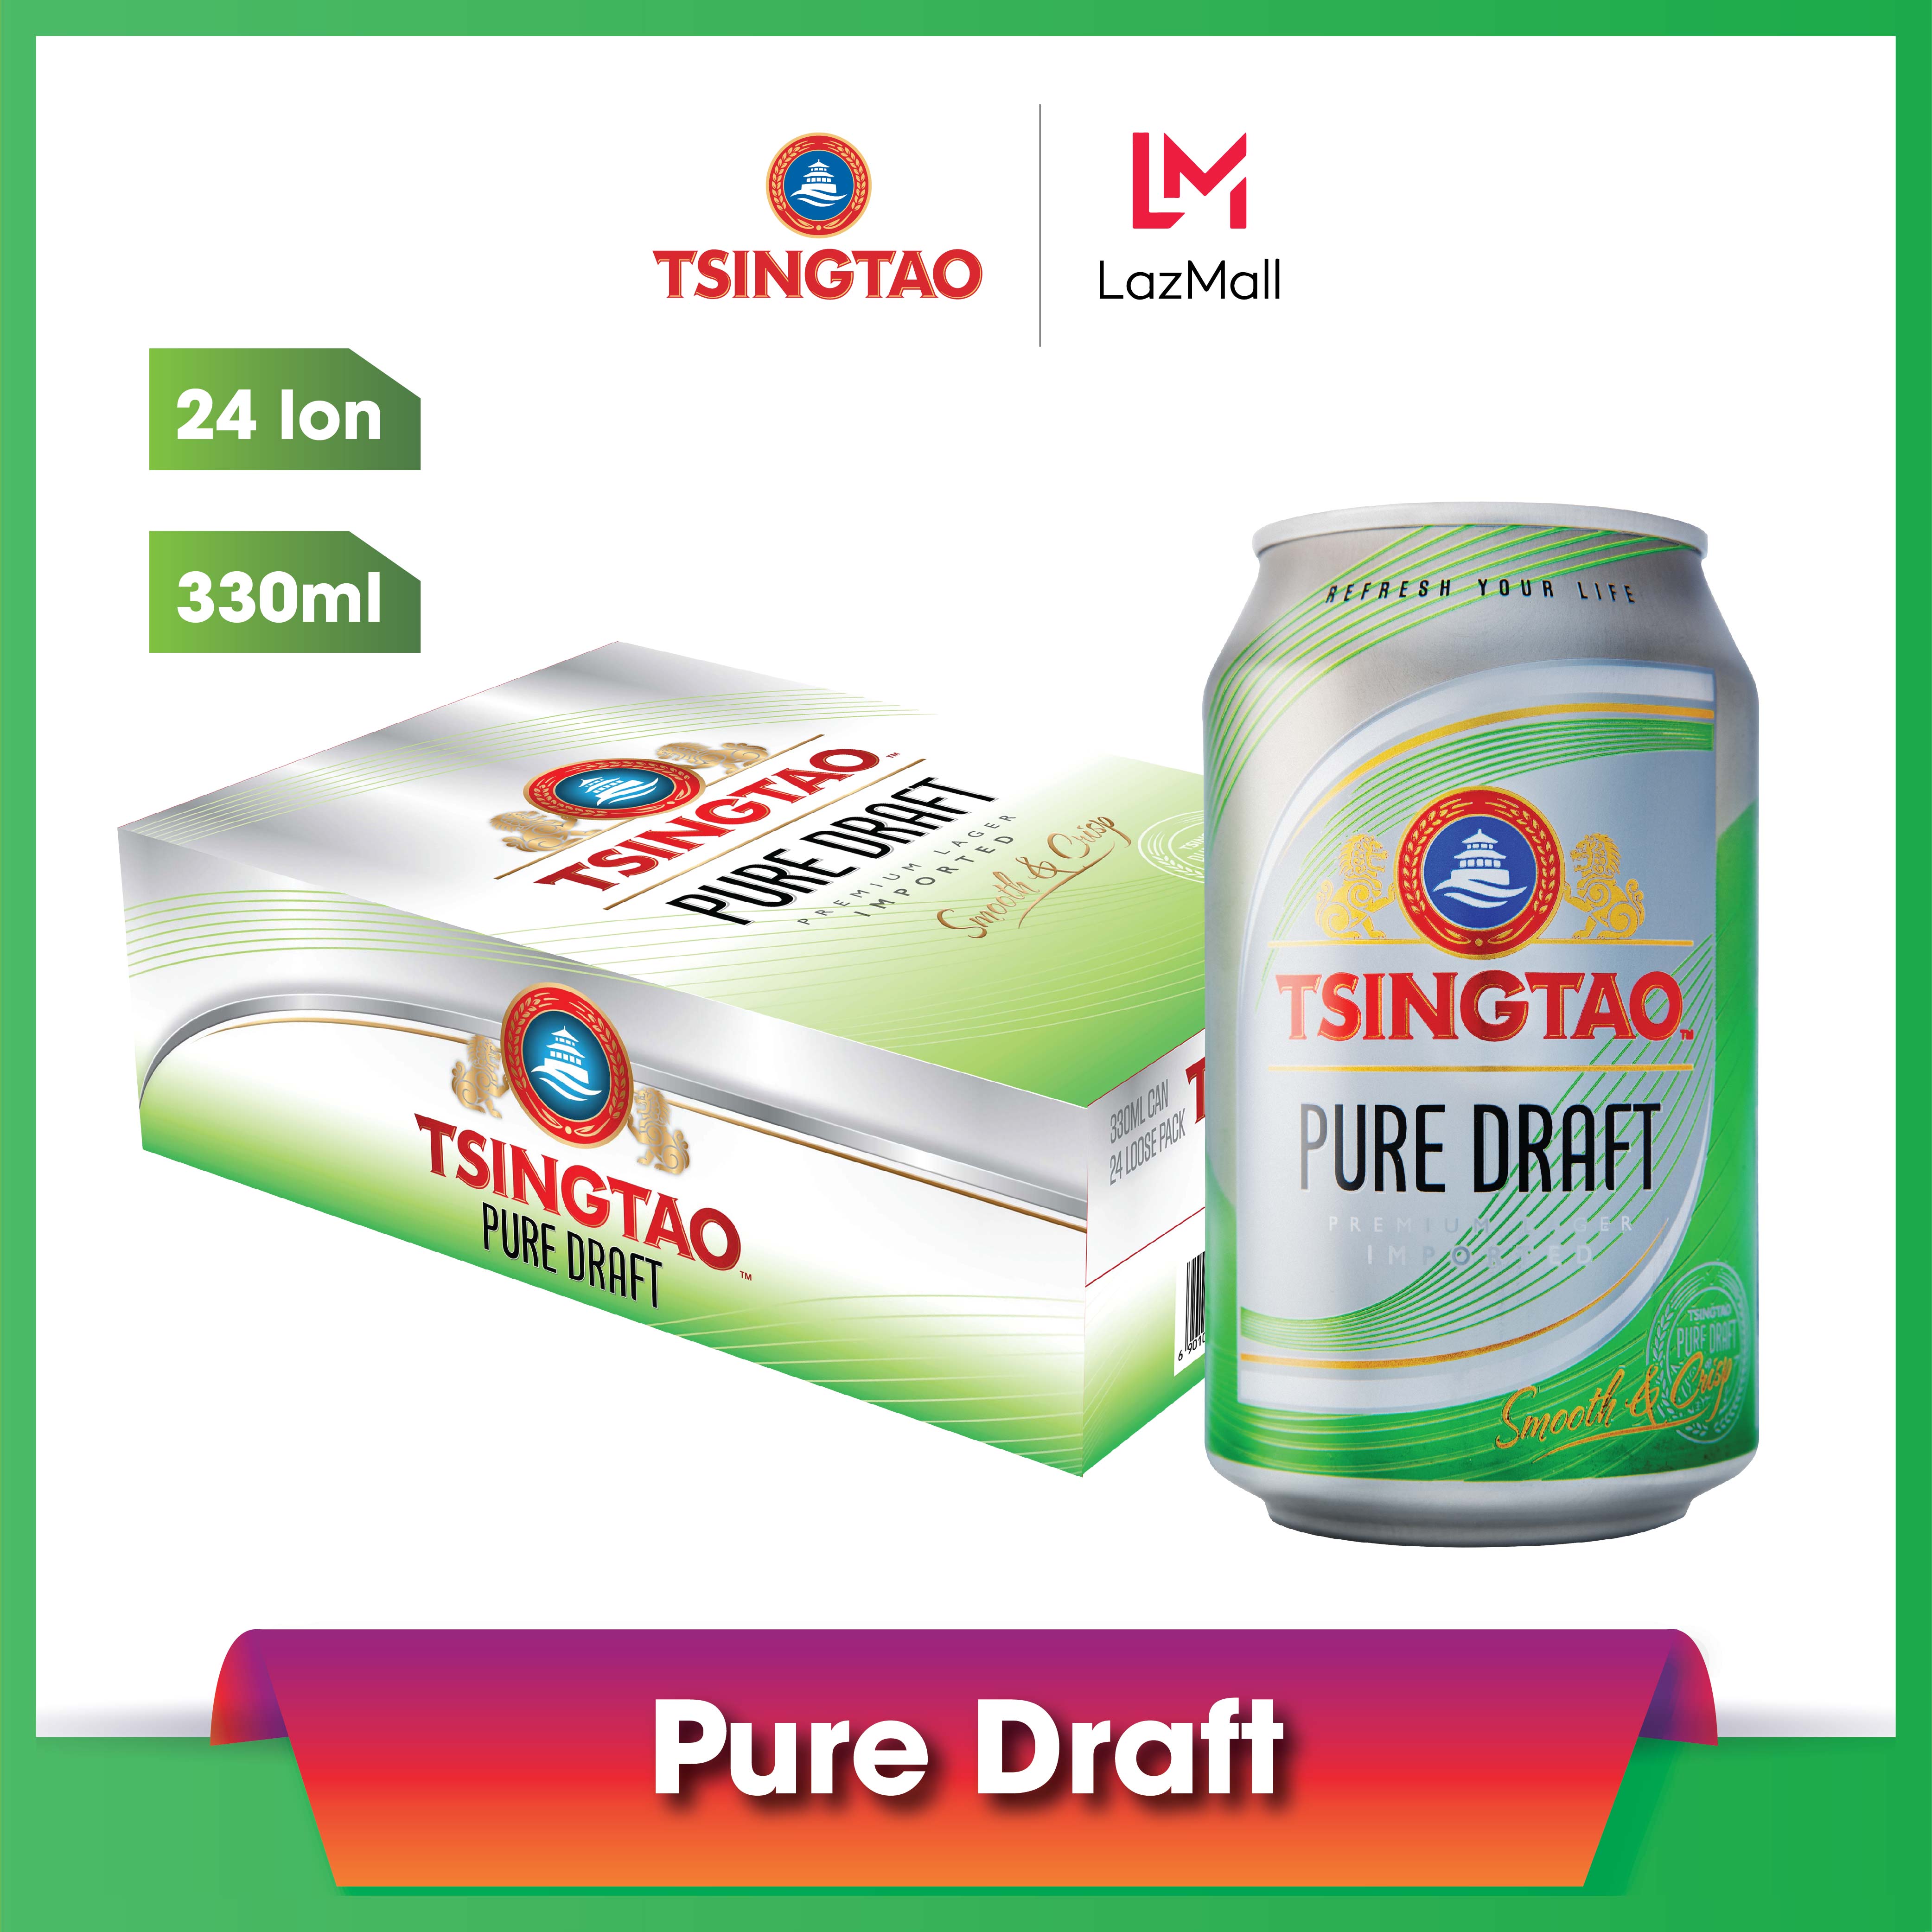 Box of 24 cans of Tsingtao Pure Draft Beer - 4.3% alcohol - 100% genuine imported Qingdao Beer